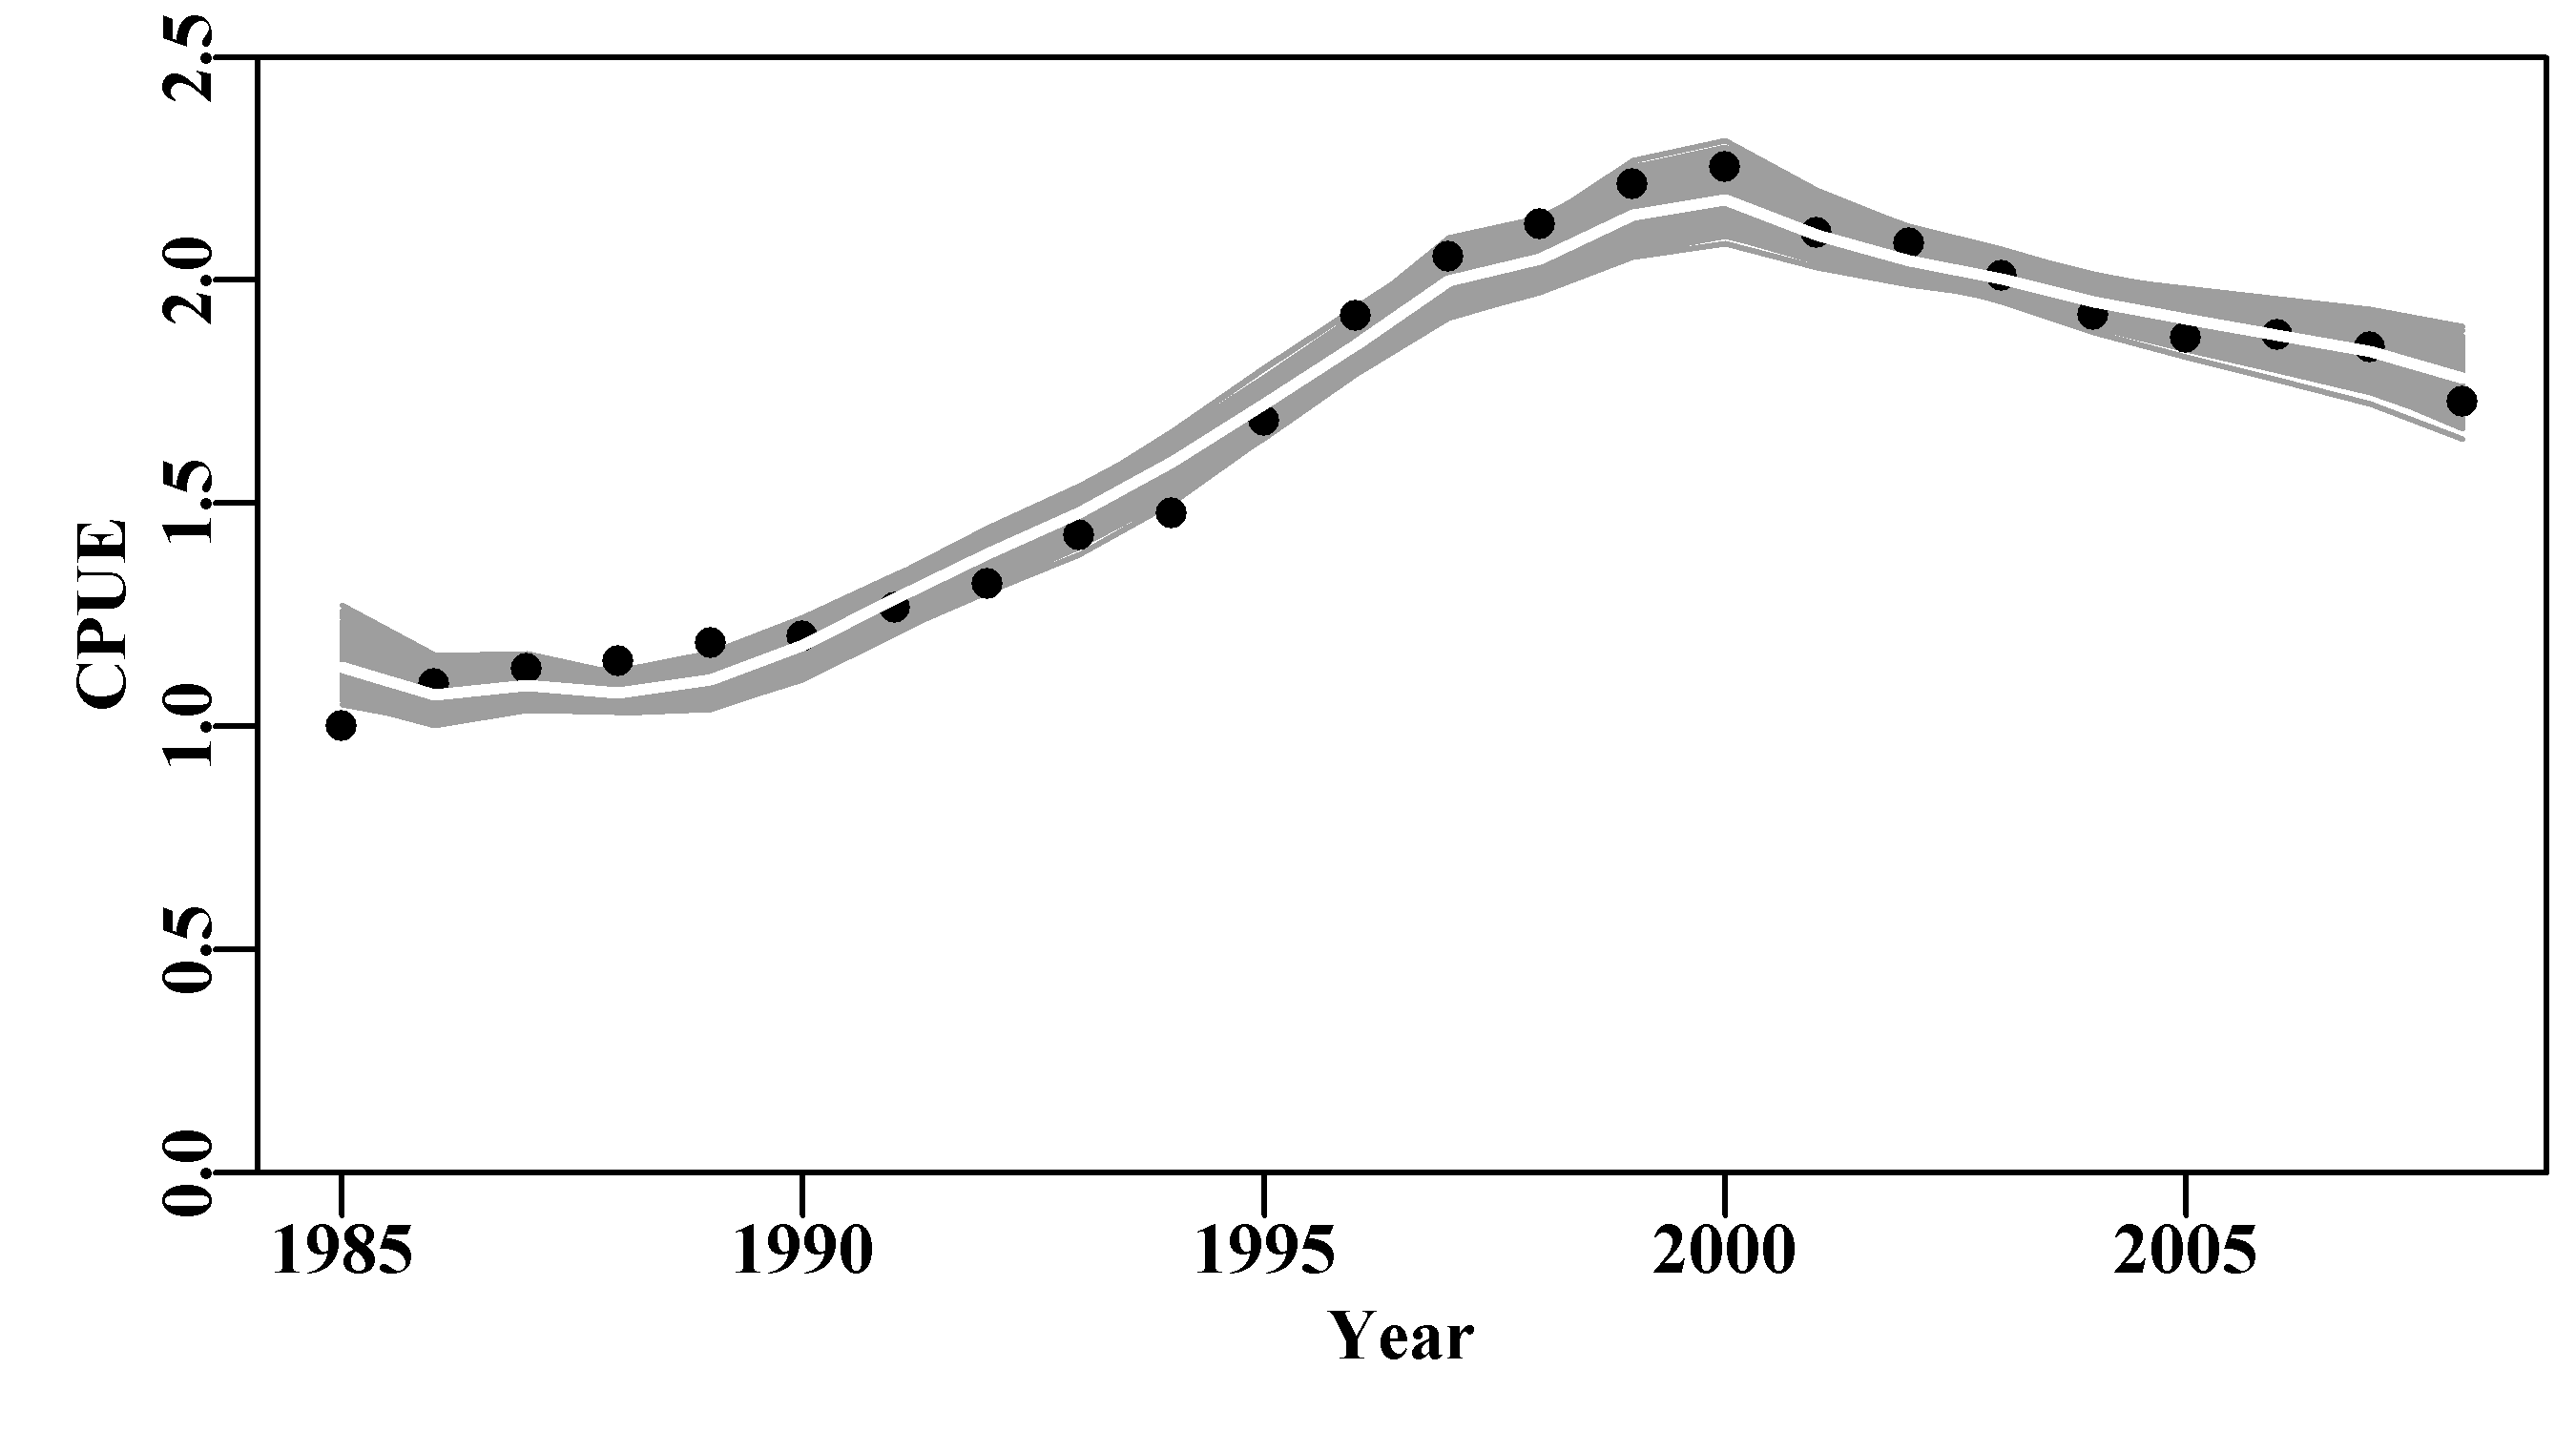 The use of asymptotic errors to generate plausible parameter sets and their implied cpue trajectories for the abdat data-set. The optimum model fit is shown as a white line.